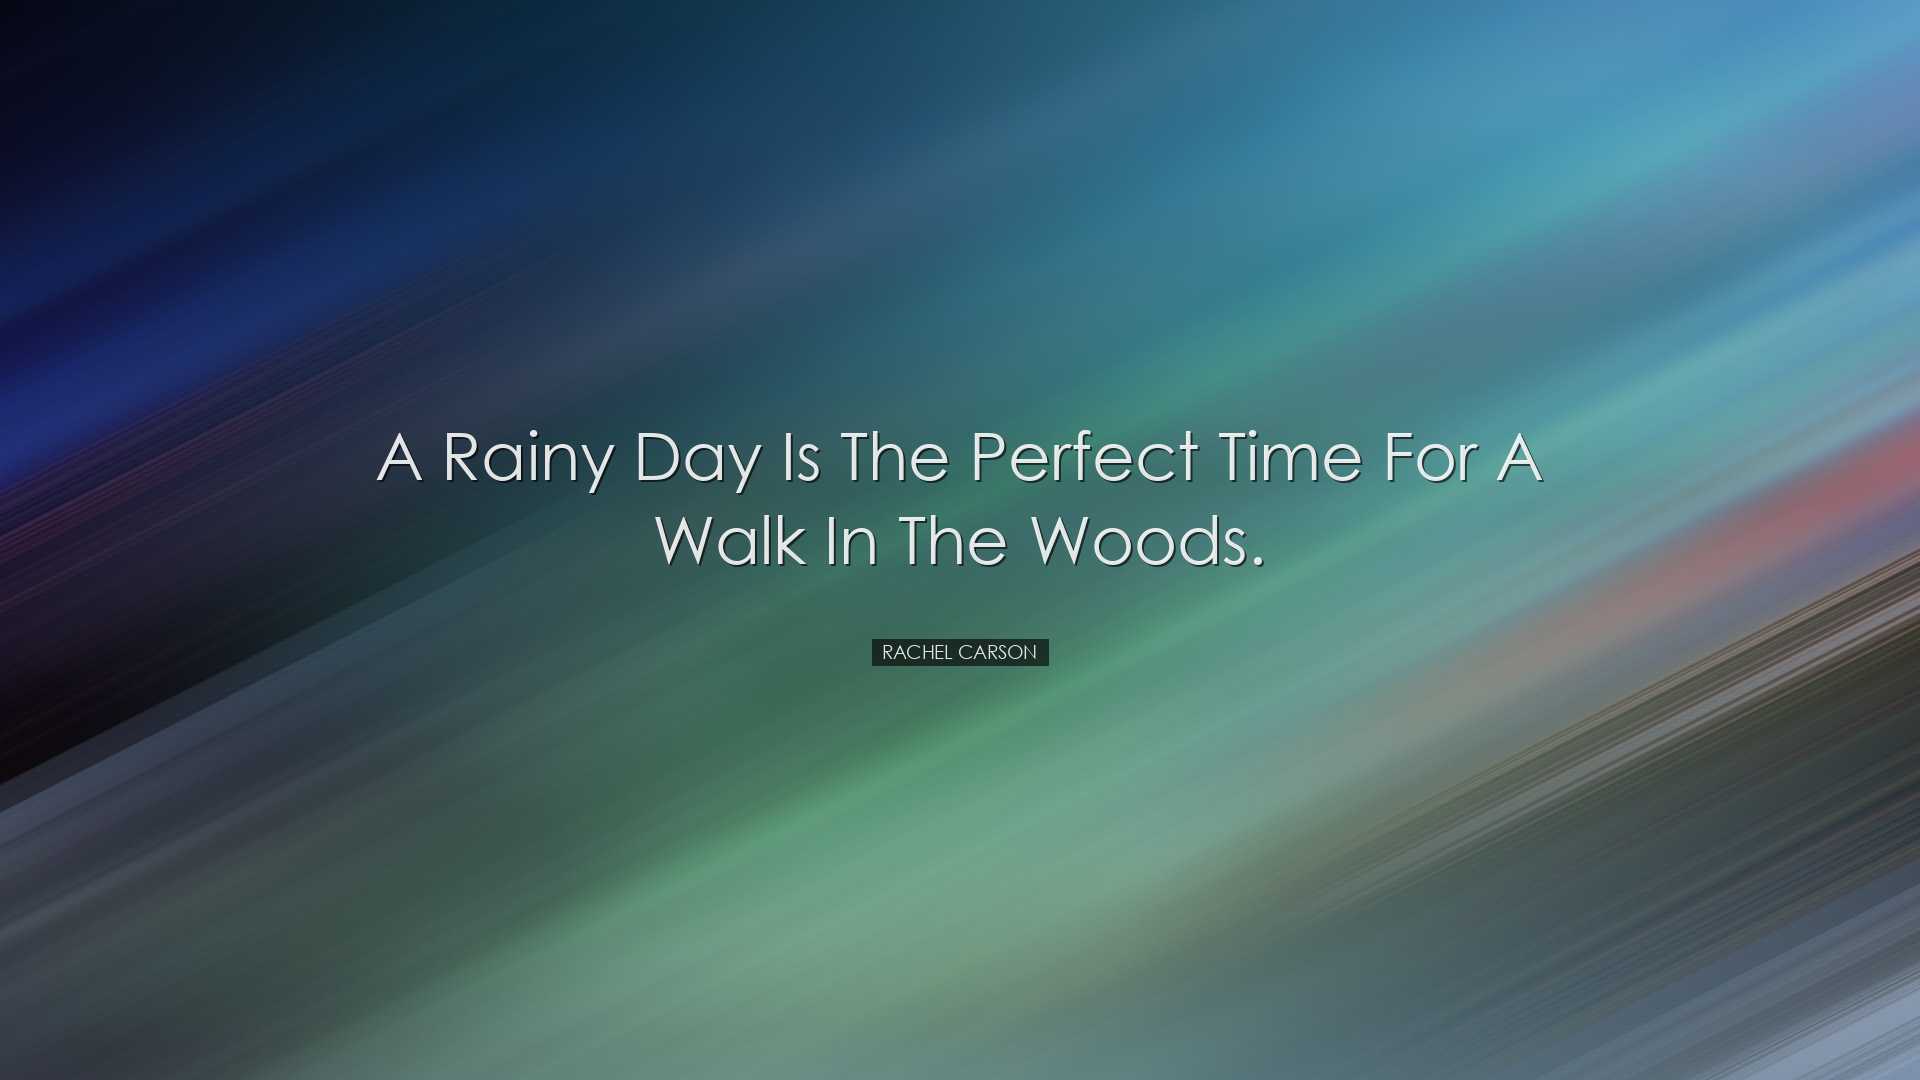 A rainy day is the perfect time for a walk in the woods. - Rachel